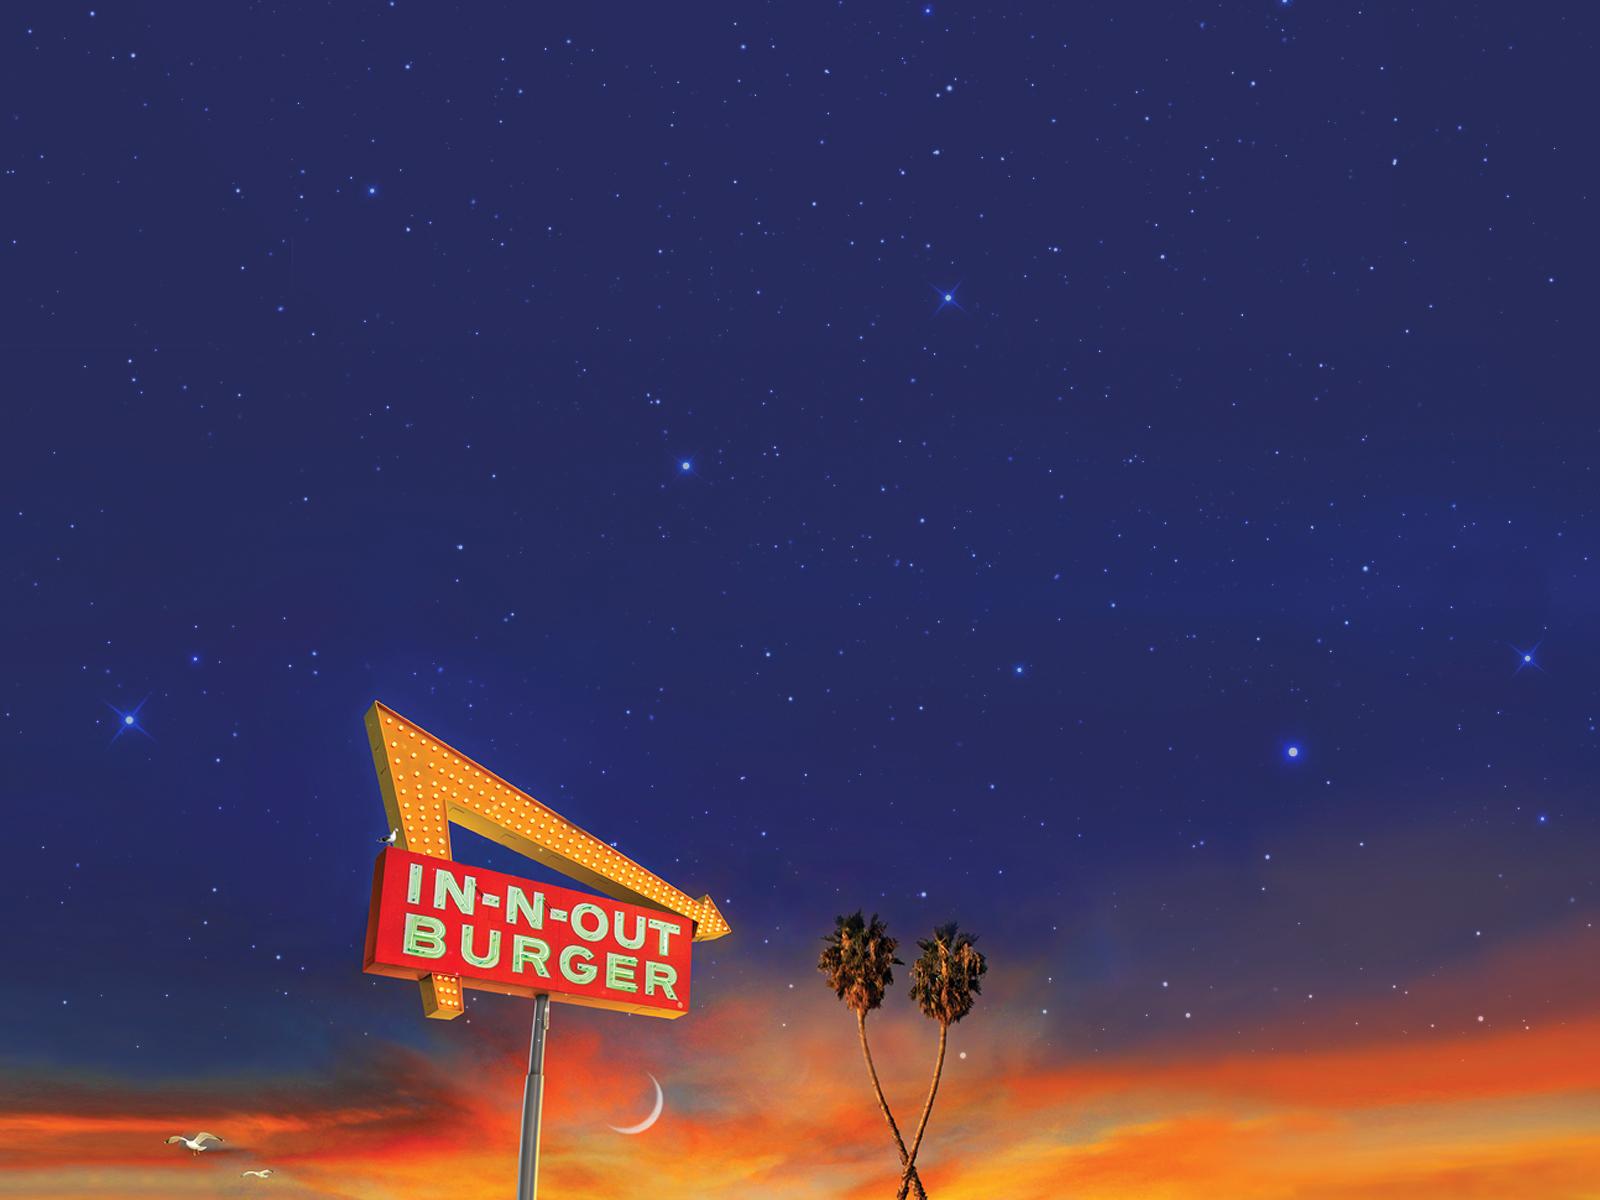 Download Wallpaper Palms N Out Burger